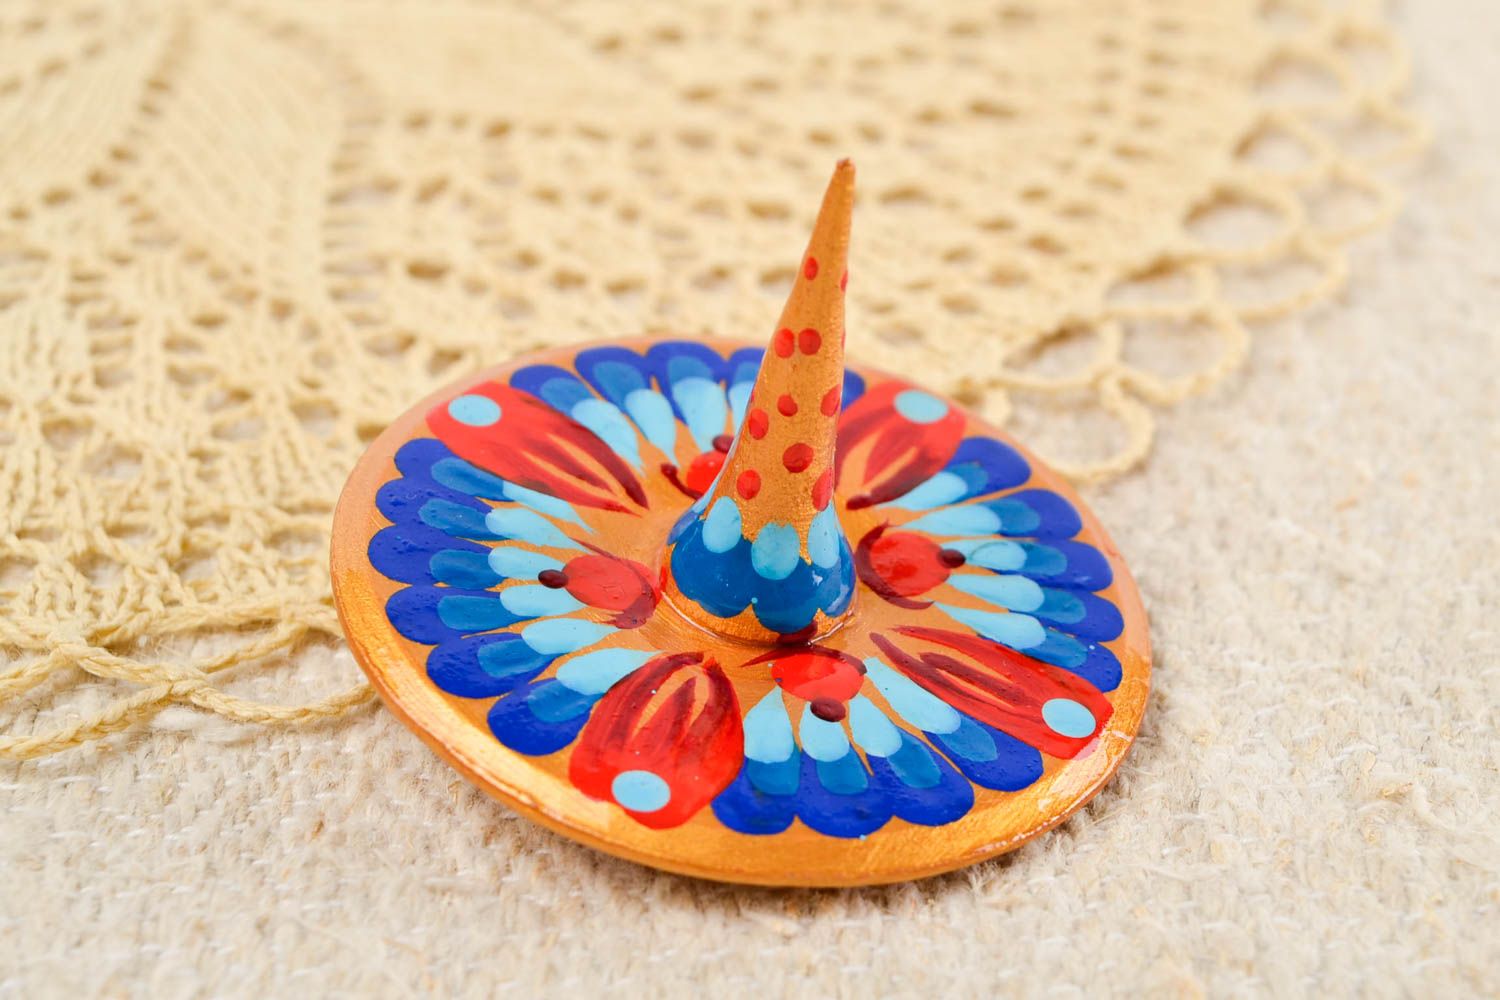 Beautiful handmade wooden spinning top smart toy spin top birthday gift ideas photo 5